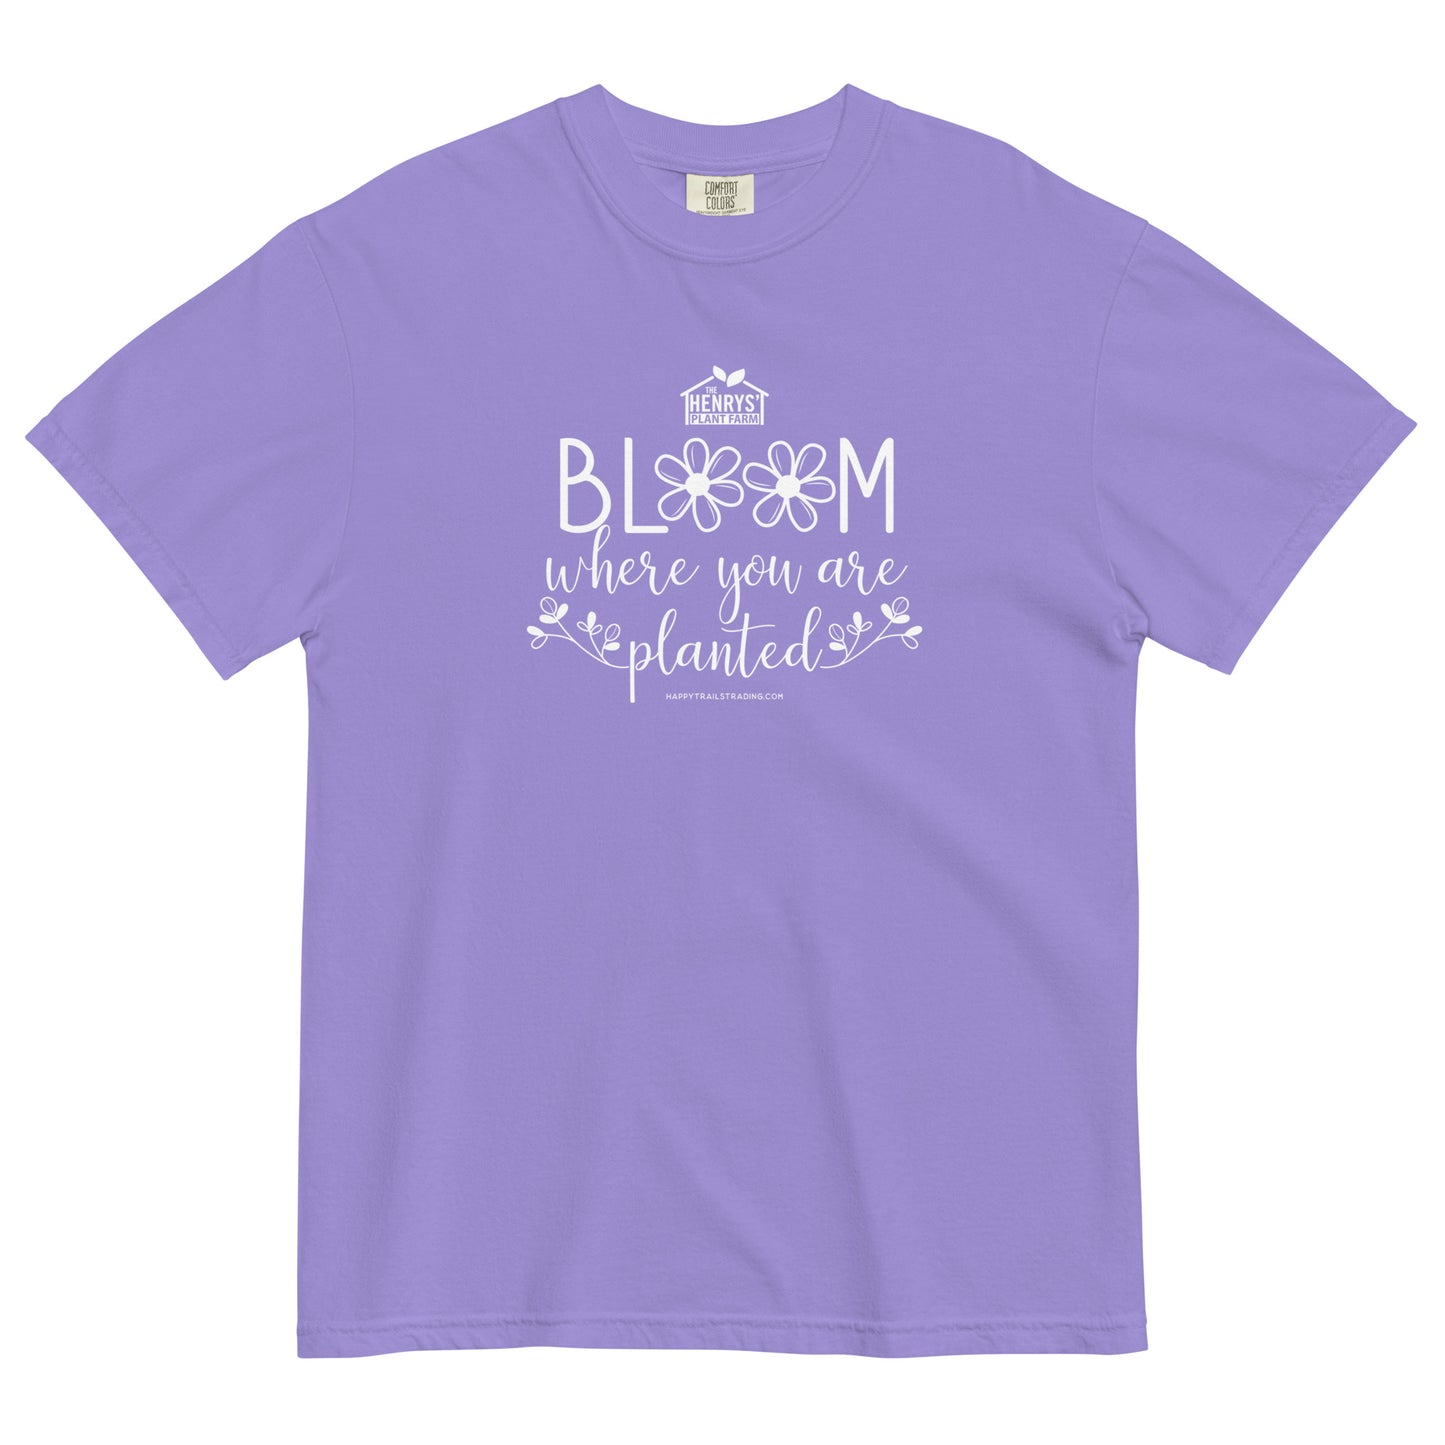 Bloom Where You Are Planted - Unisex T-Shirt